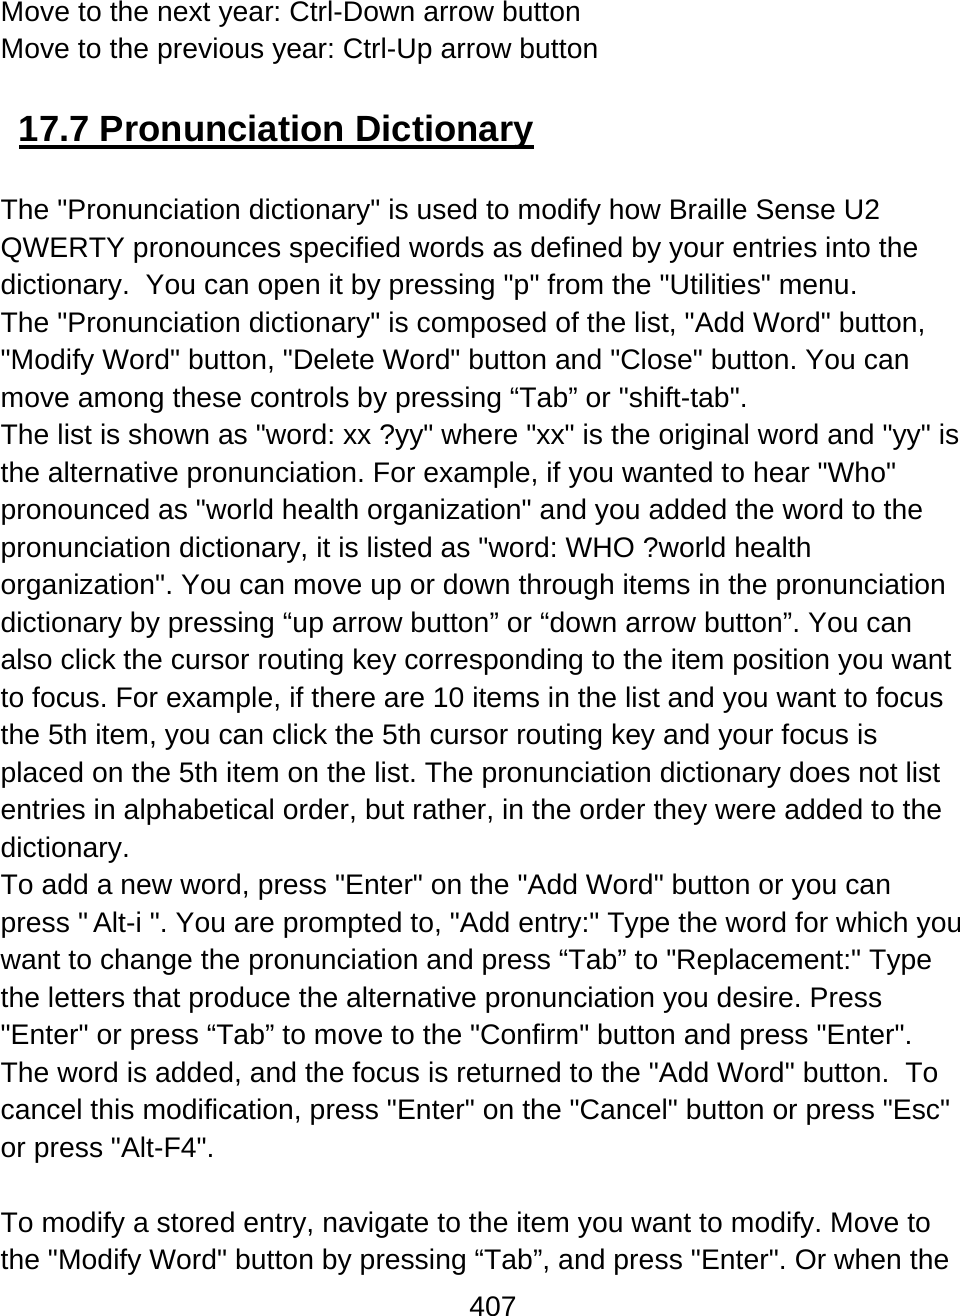 407  Move to the next year: Ctrl-Down arrow button Move to the previous year: Ctrl-Up arrow button  17.7 Pronunciation Dictionary  The &quot;Pronunciation dictionary&quot; is used to modify how Braille Sense U2 QWERTY pronounces specified words as defined by your entries into the dictionary.  You can open it by pressing &quot;p&quot; from the &quot;Utilities&quot; menu. The &quot;Pronunciation dictionary&quot; is composed of the list, &quot;Add Word&quot; button, &quot;Modify Word&quot; button, &quot;Delete Word&quot; button and &quot;Close&quot; button. You can move among these controls by pressing “Tab” or &quot;shift-tab&quot;.  The list is shown as &quot;word: xx ?yy&quot; where &quot;xx&quot; is the original word and &quot;yy&quot; is the alternative pronunciation. For example, if you wanted to hear &quot;Who&quot; pronounced as &quot;world health organization&quot; and you added the word to the pronunciation dictionary, it is listed as &quot;word: WHO ?world health organization&quot;. You can move up or down through items in the pronunciation dictionary by pressing “up arrow button” or “down arrow button”. You can also click the cursor routing key corresponding to the item position you want to focus. For example, if there are 10 items in the list and you want to focus the 5th item, you can click the 5th cursor routing key and your focus is placed on the 5th item on the list. The pronunciation dictionary does not list entries in alphabetical order, but rather, in the order they were added to the dictionary.  To add a new word, press &quot;Enter&quot; on the &quot;Add Word&quot; button or you can press &quot;Alt-i &quot;. You are prompted to, &quot;Add entry:&quot; Type the word for which you want to change the pronunciation and press “Tab” to &quot;Replacement:&quot; Type the letters that produce the alternative pronunciation you desire. Press &quot;Enter&quot; or press “Tab” to move to the &quot;Confirm&quot; button and press &quot;Enter&quot;. The word is added, and the focus is returned to the &quot;Add Word&quot; button.  To cancel this modification, press &quot;Enter&quot; on the &quot;Cancel&quot; button or press &quot;Esc&quot; or press &quot;Alt-F4&quot;.  To modify a stored entry, navigate to the item you want to modify. Move to the &quot;Modify Word&quot; button by pressing “Tab”, and press &quot;Enter&quot;. Or when the 